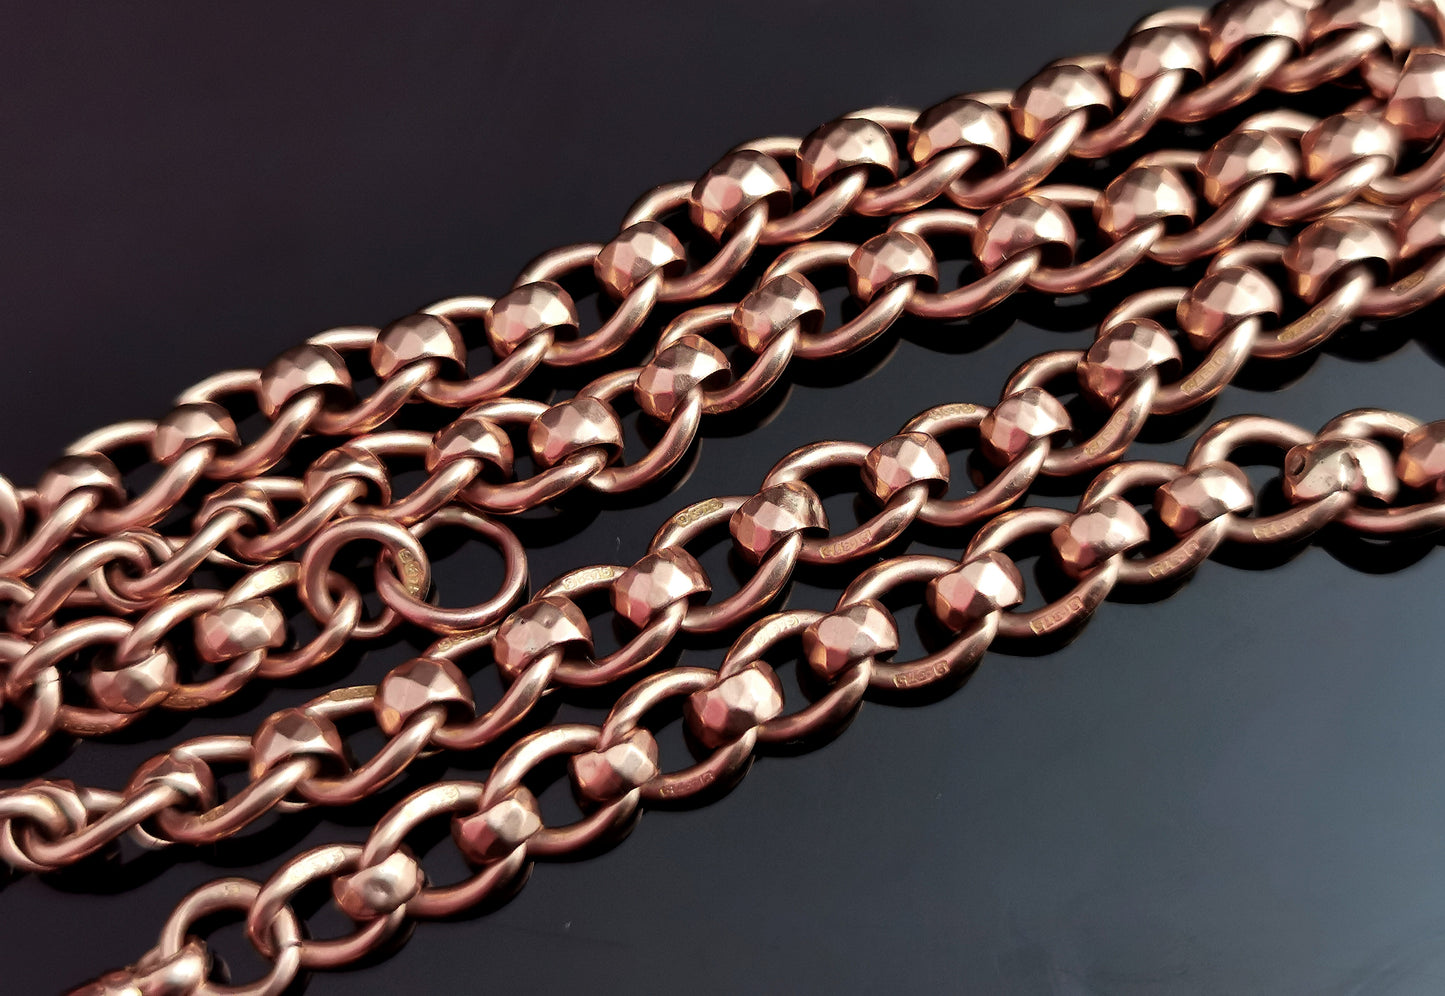 Antique 9ct Rose gold double Albert chain, watch chain necklace, fancy link